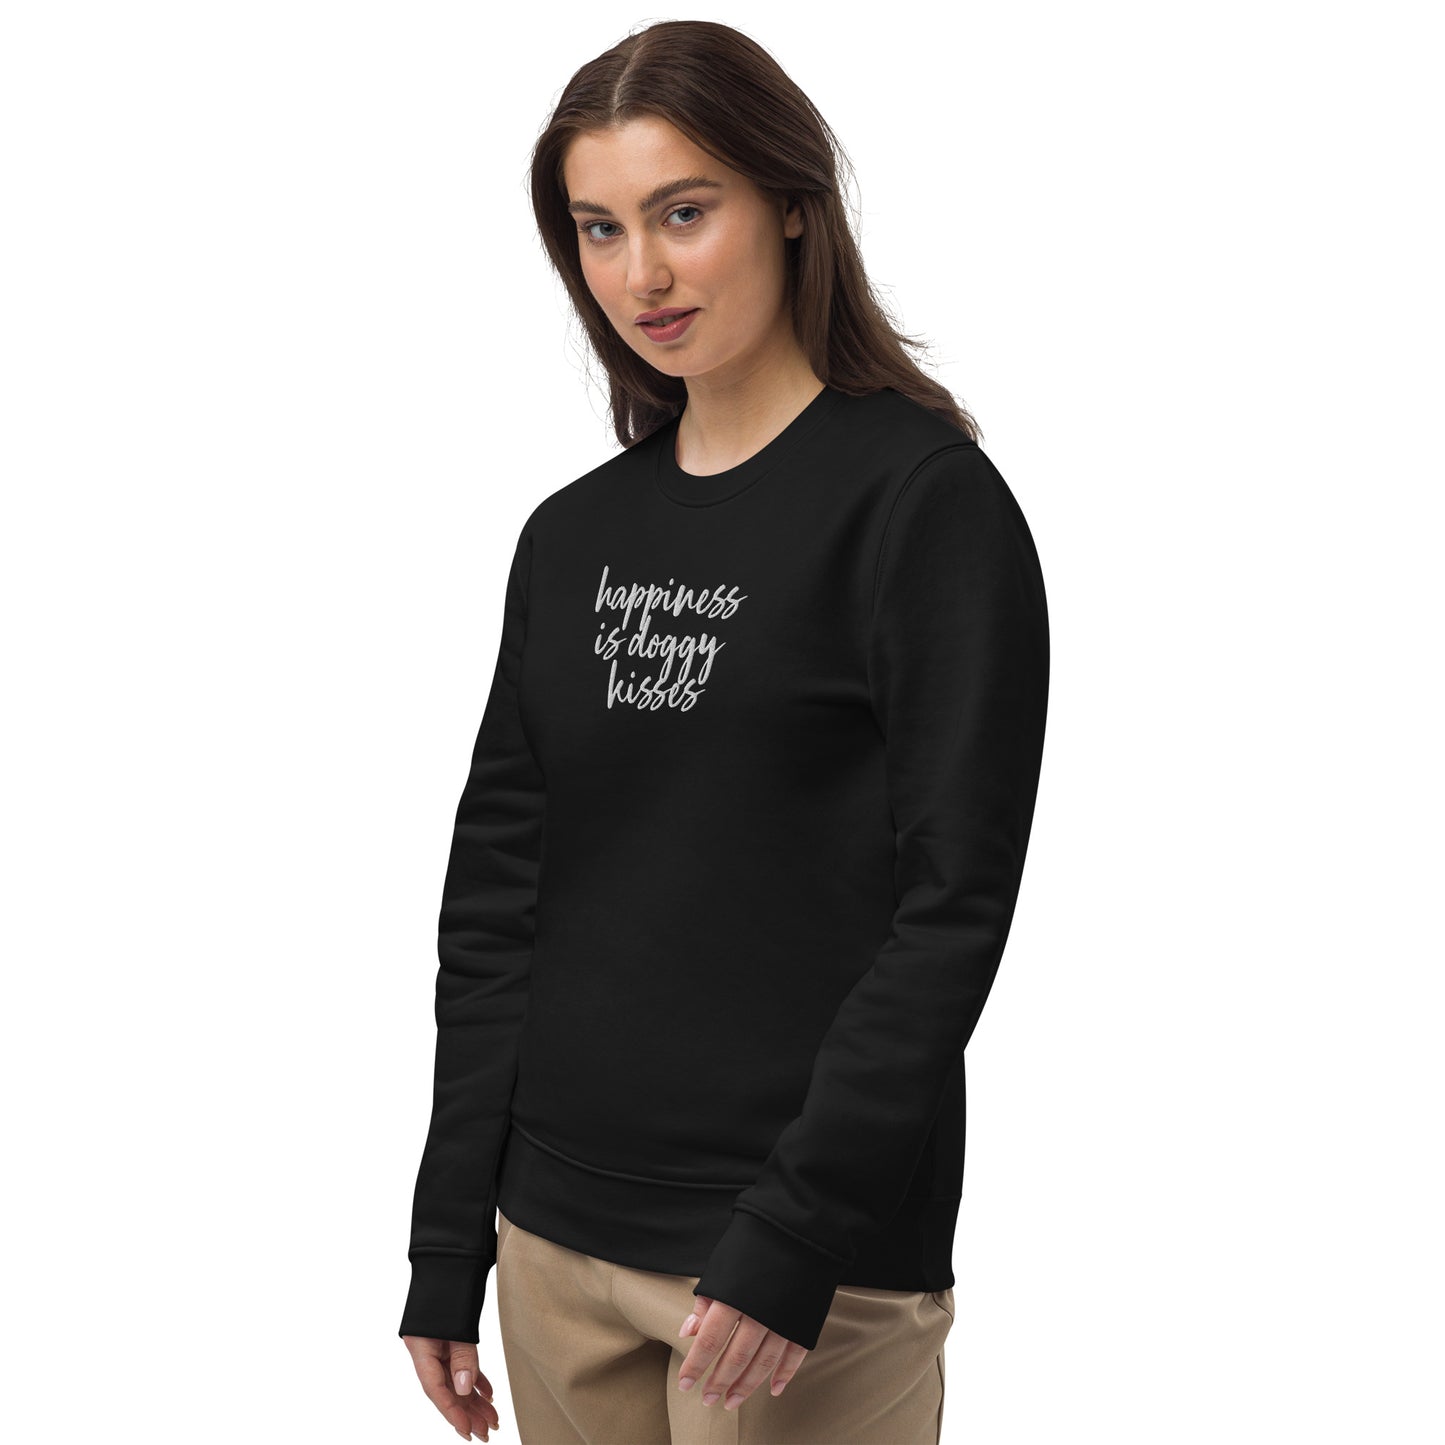 Pullover - happiness is doggy kisses - gestickt